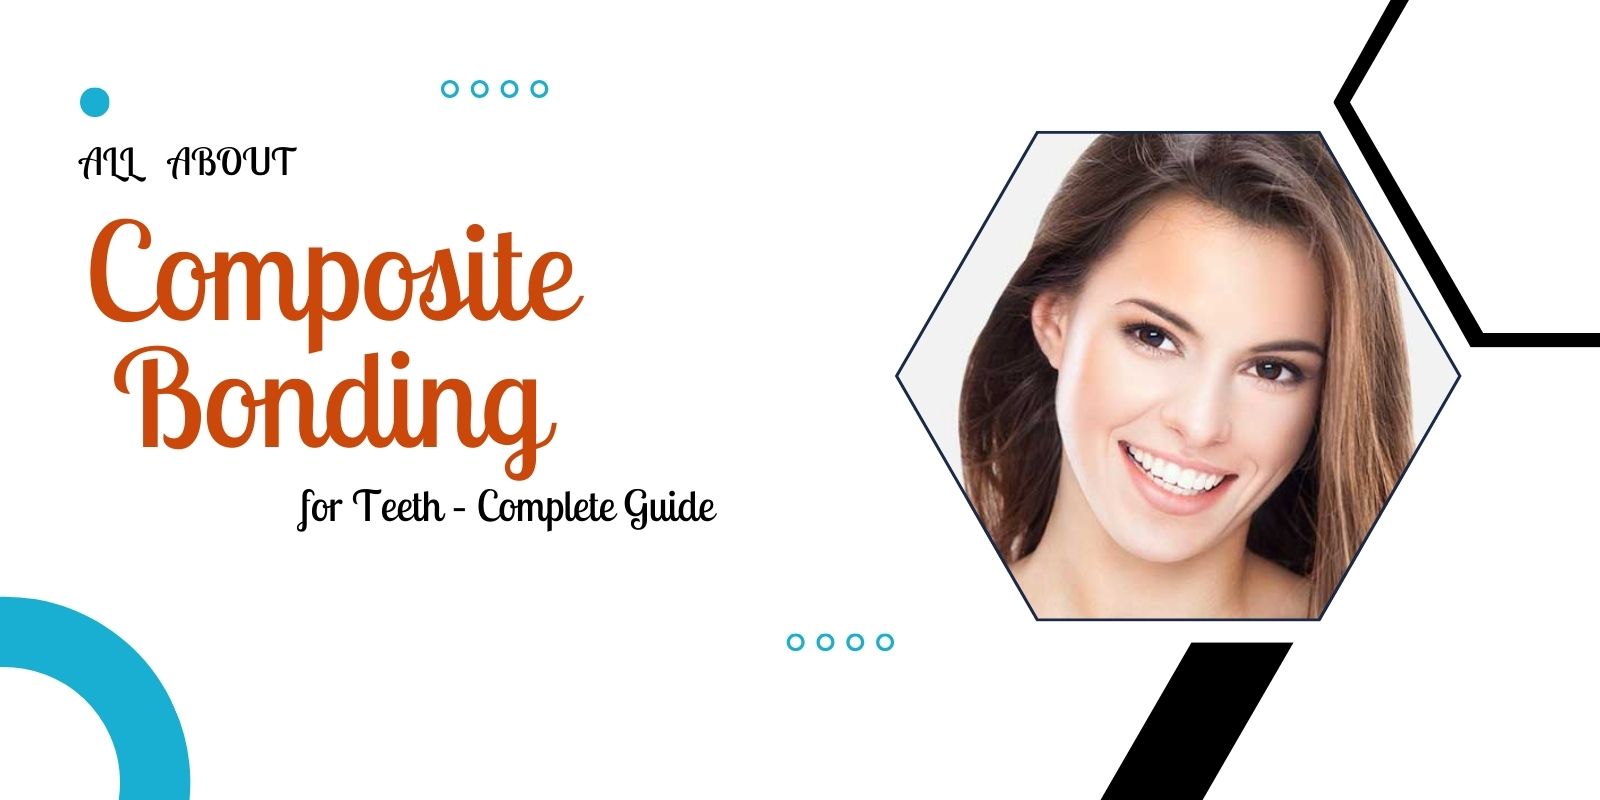 All About Composite Bonding for Teeth – Complete Guide